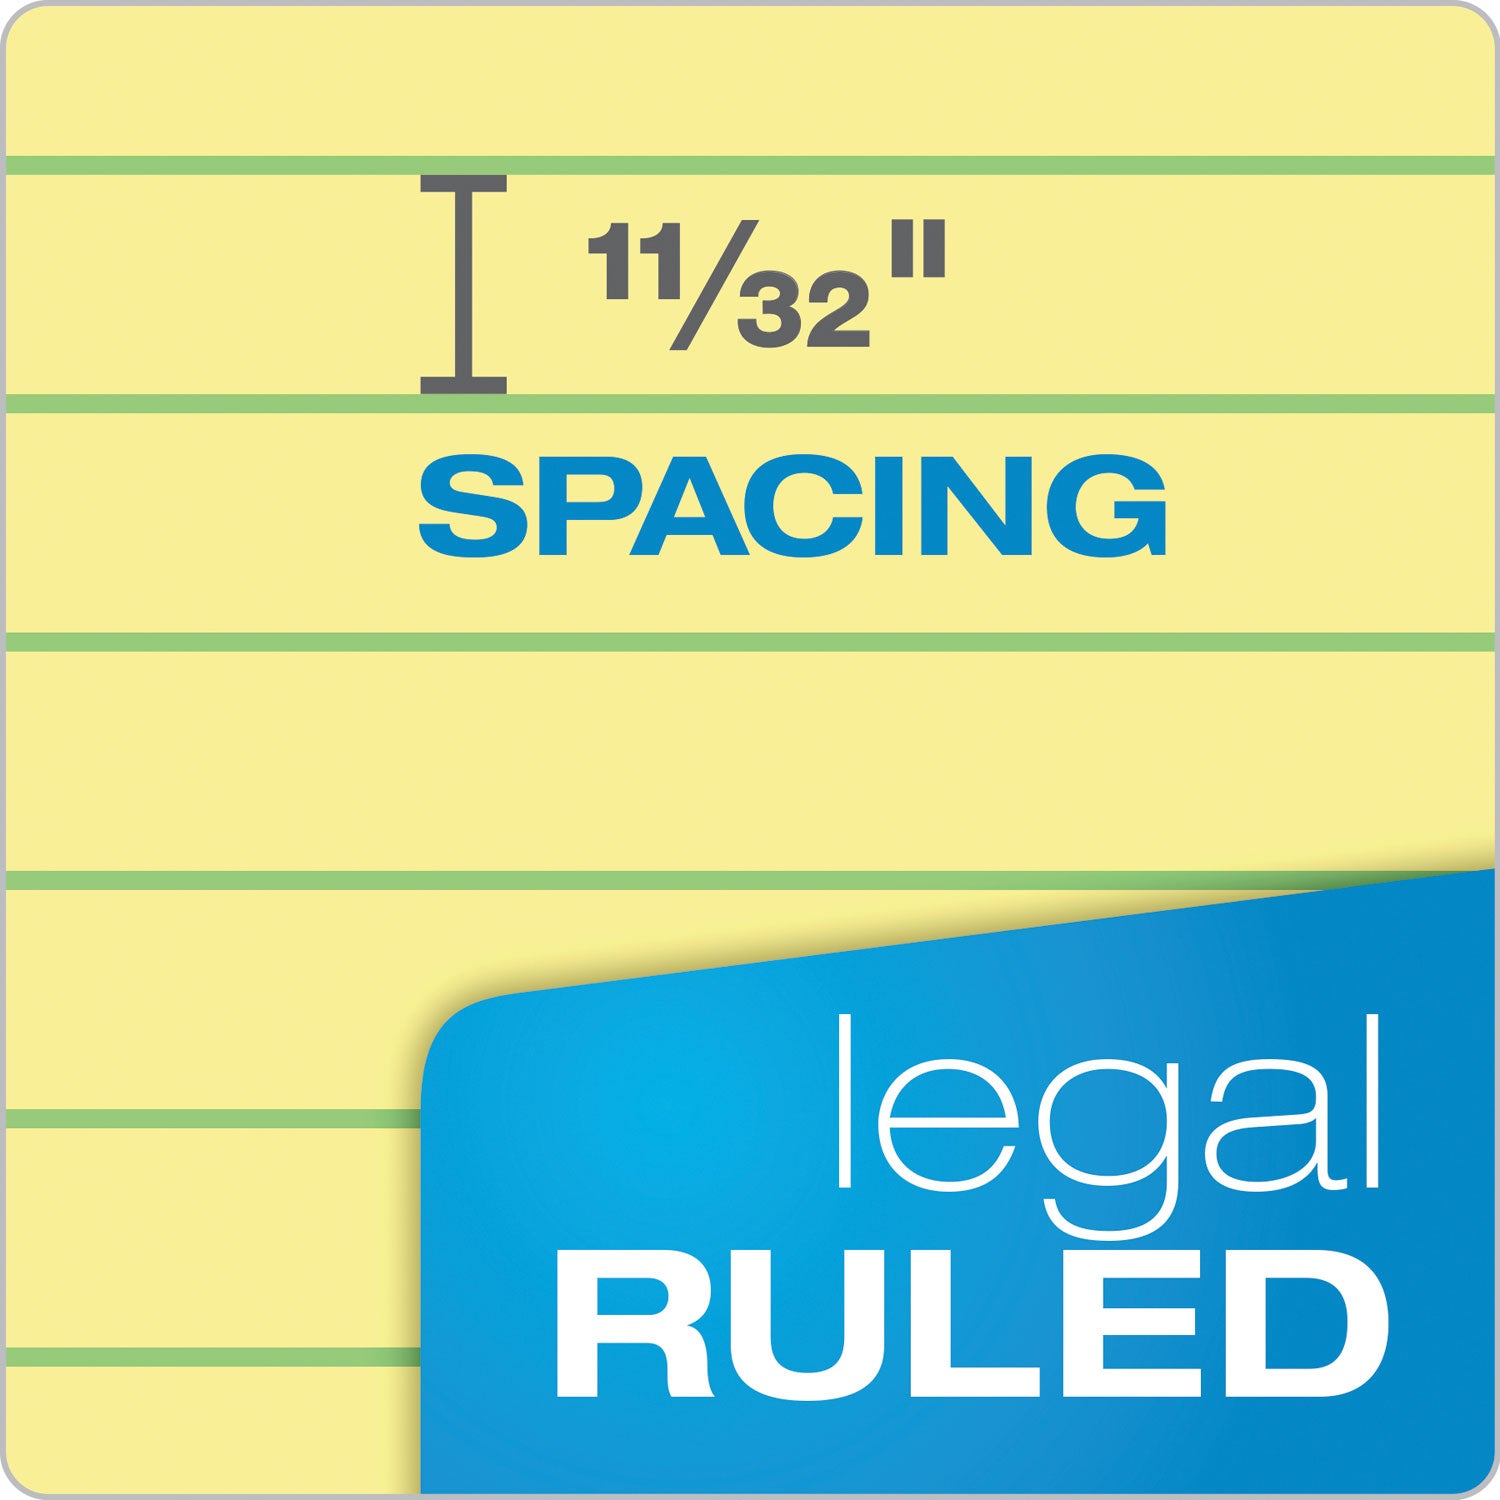 Docket Ruled Wirebound Pad with Cover, Wide/Legal Rule, Blue Cover, 70 Canary-Yellow 8.5 x 11.75 Sheets - 